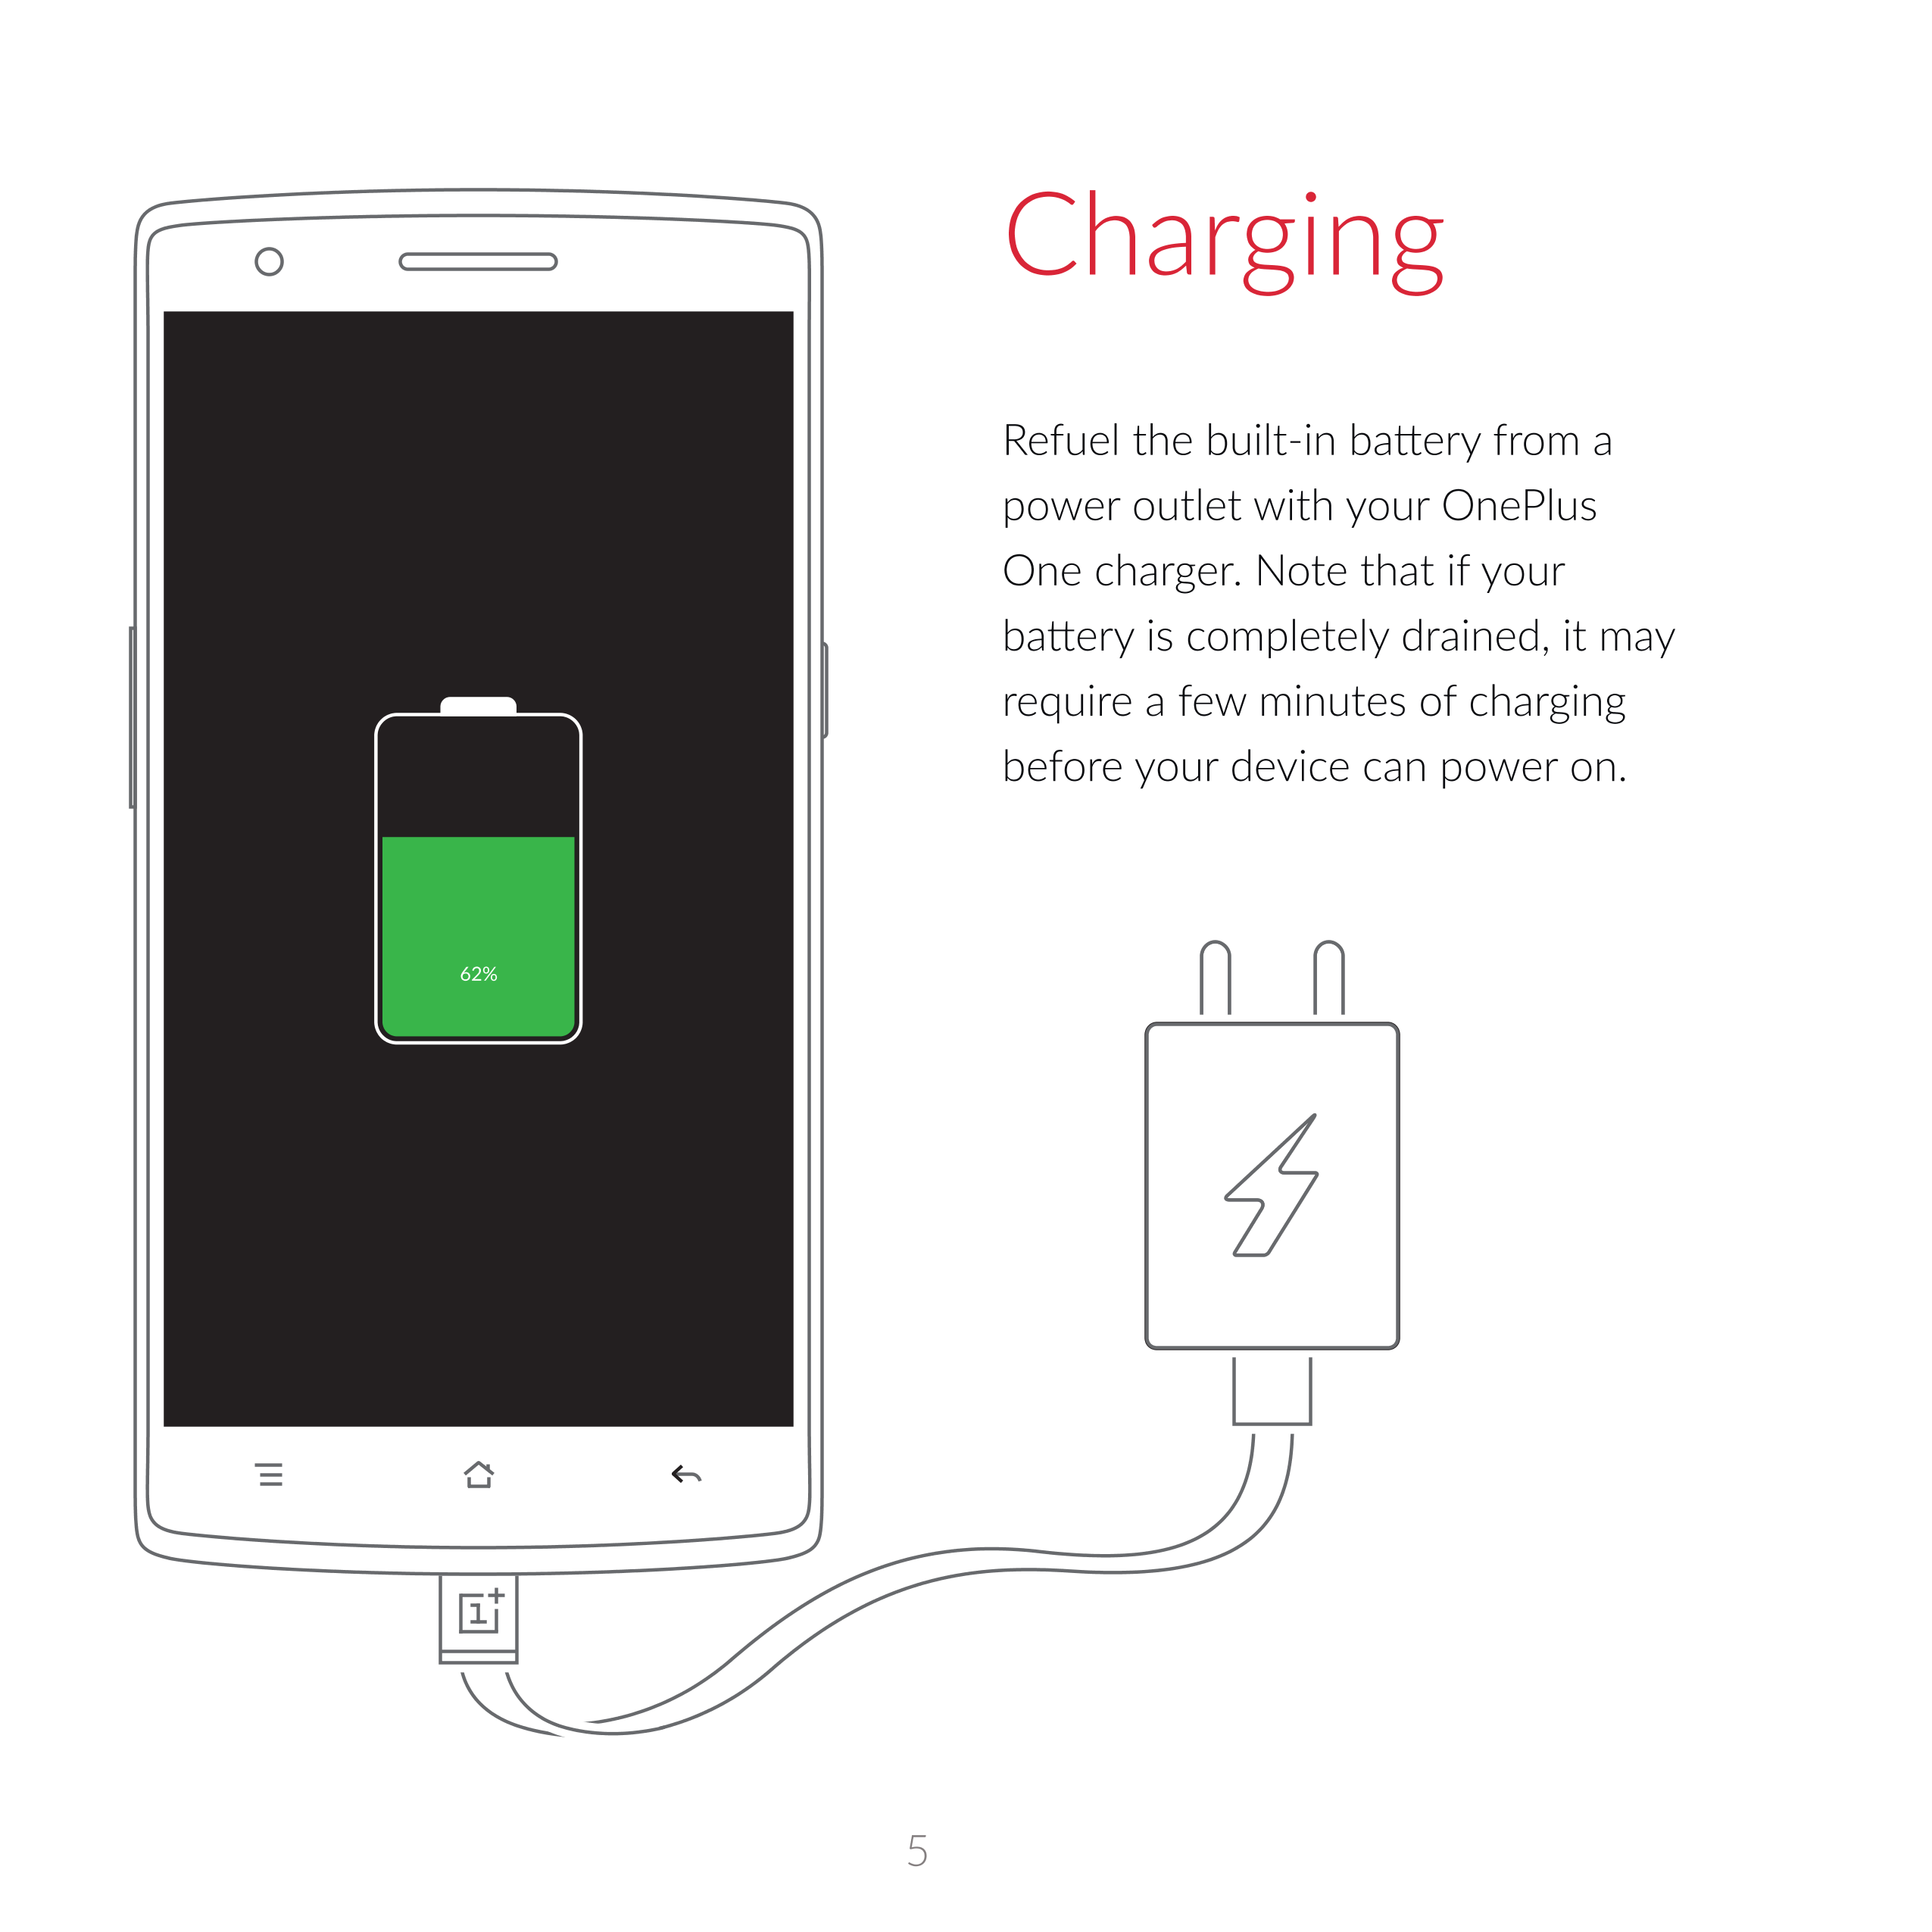 Charging
power outlet  with  your  OnePlus 
One charger.  Note that if  your 
require a  few minutes  of charging 
before  your 